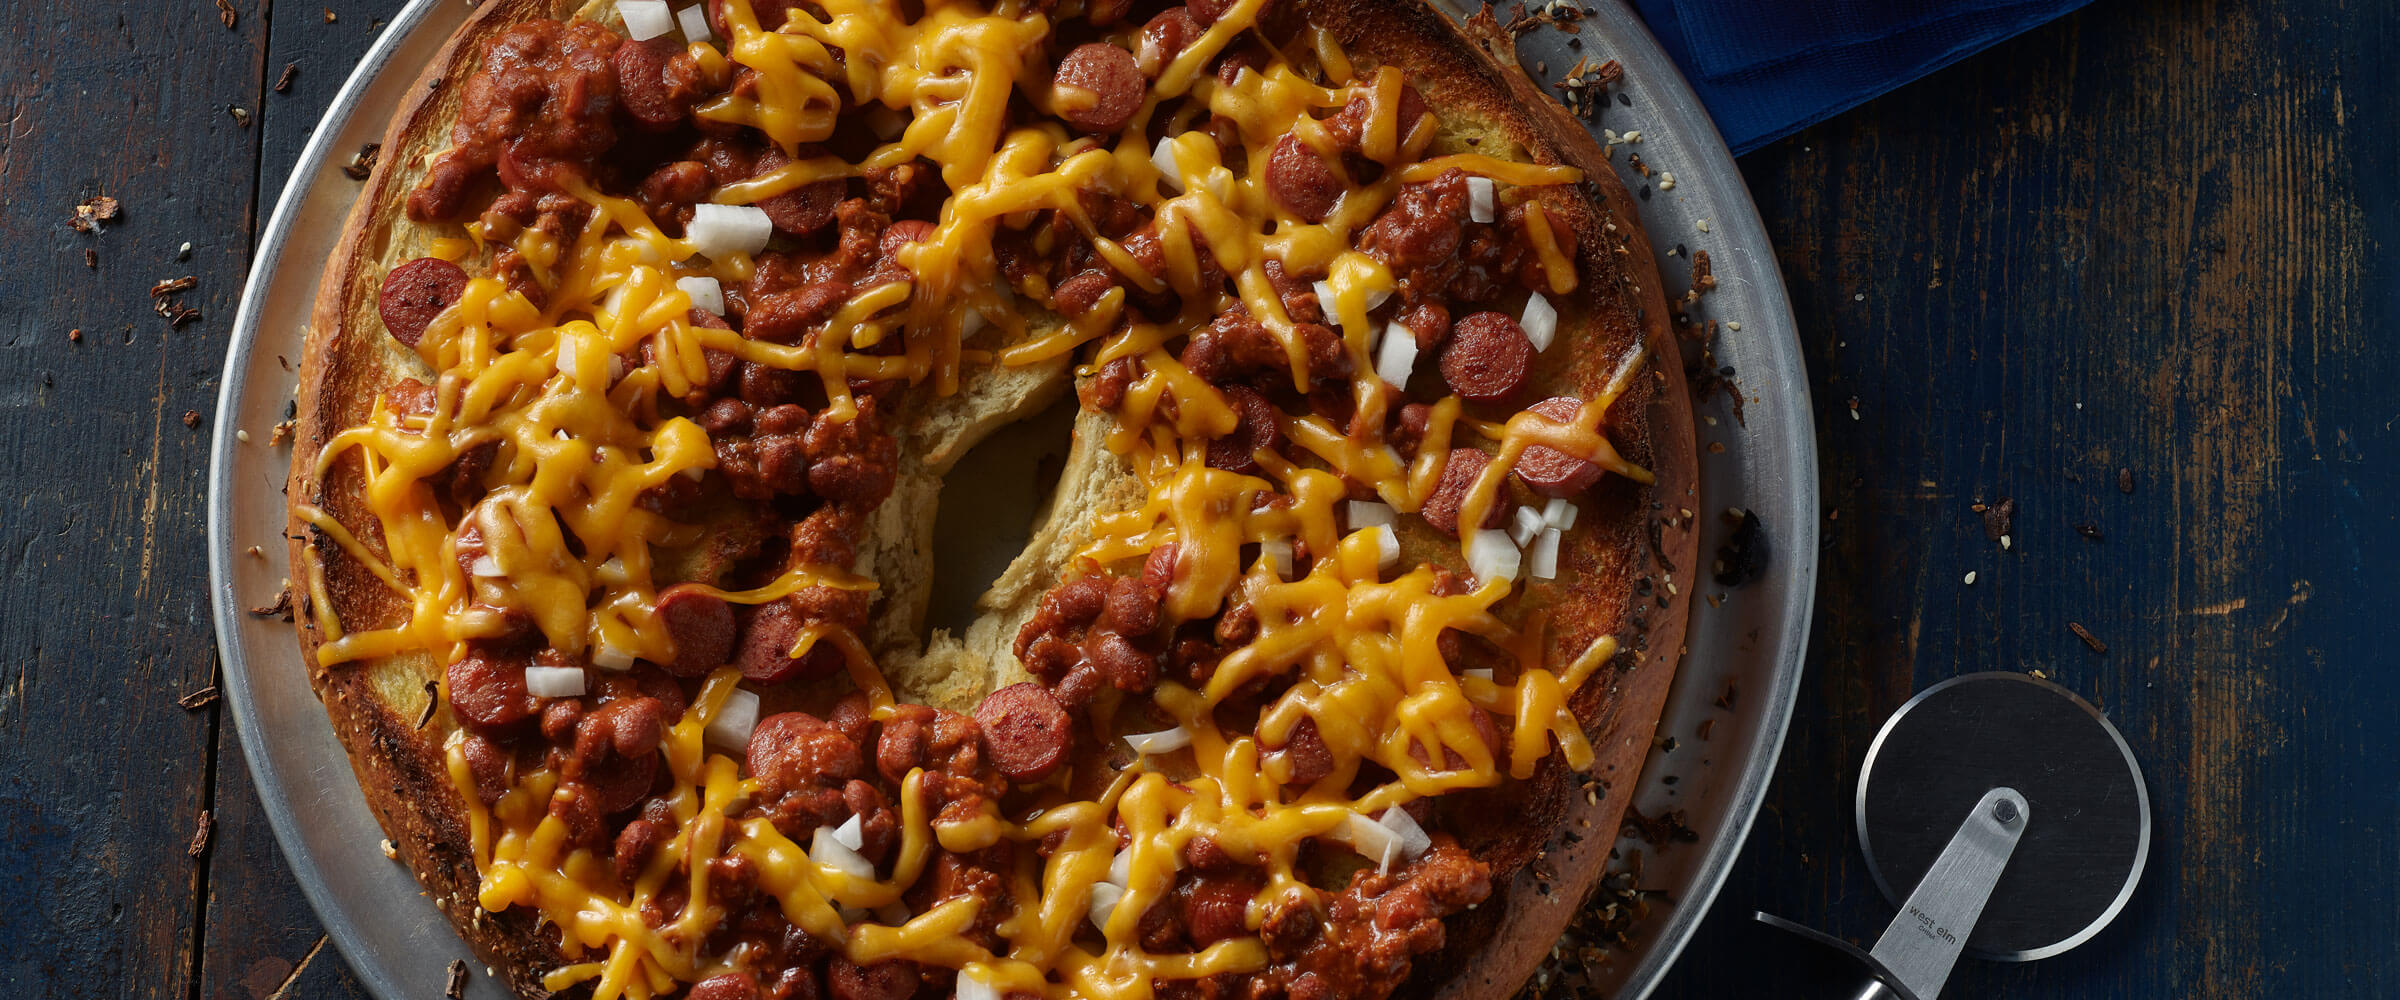 Chili Cheese Dog Bagel Pizza on pizza pan with pizza cutter